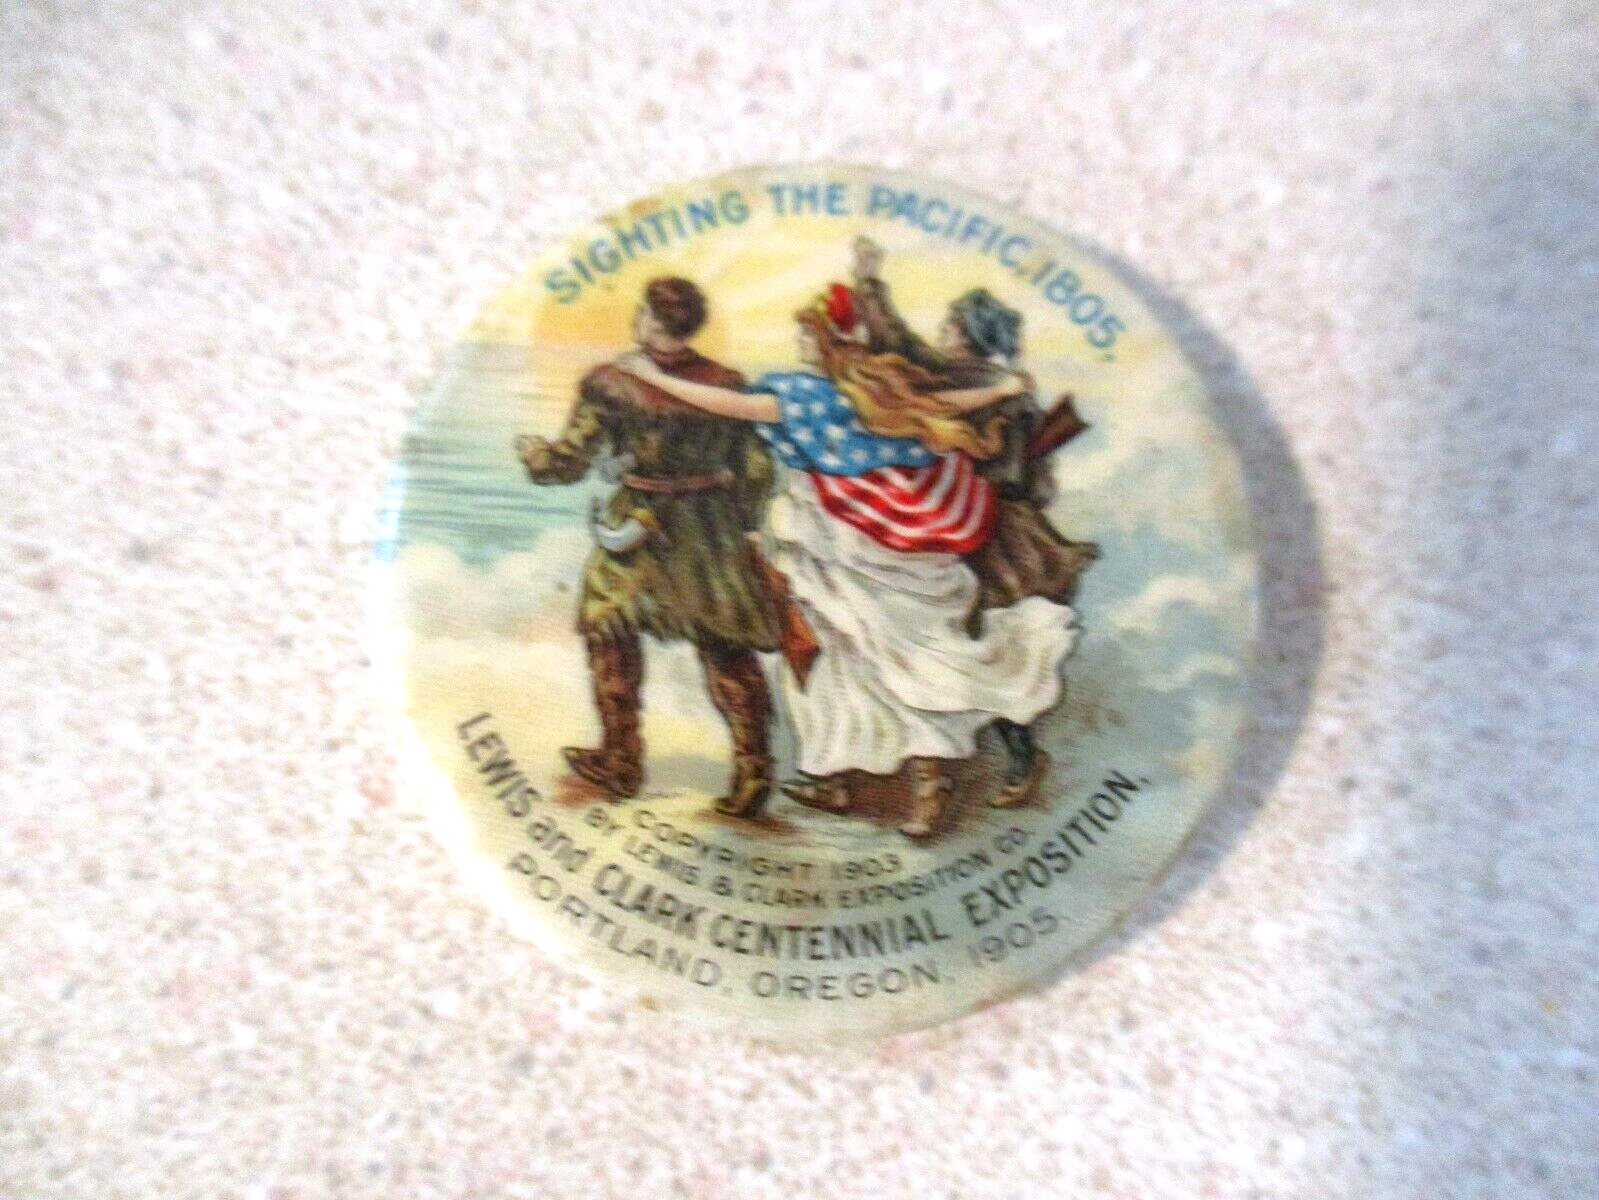 Lewis & Clark Centennial Exposition 1905 Sighting The Pacific 1805 celluloid pin